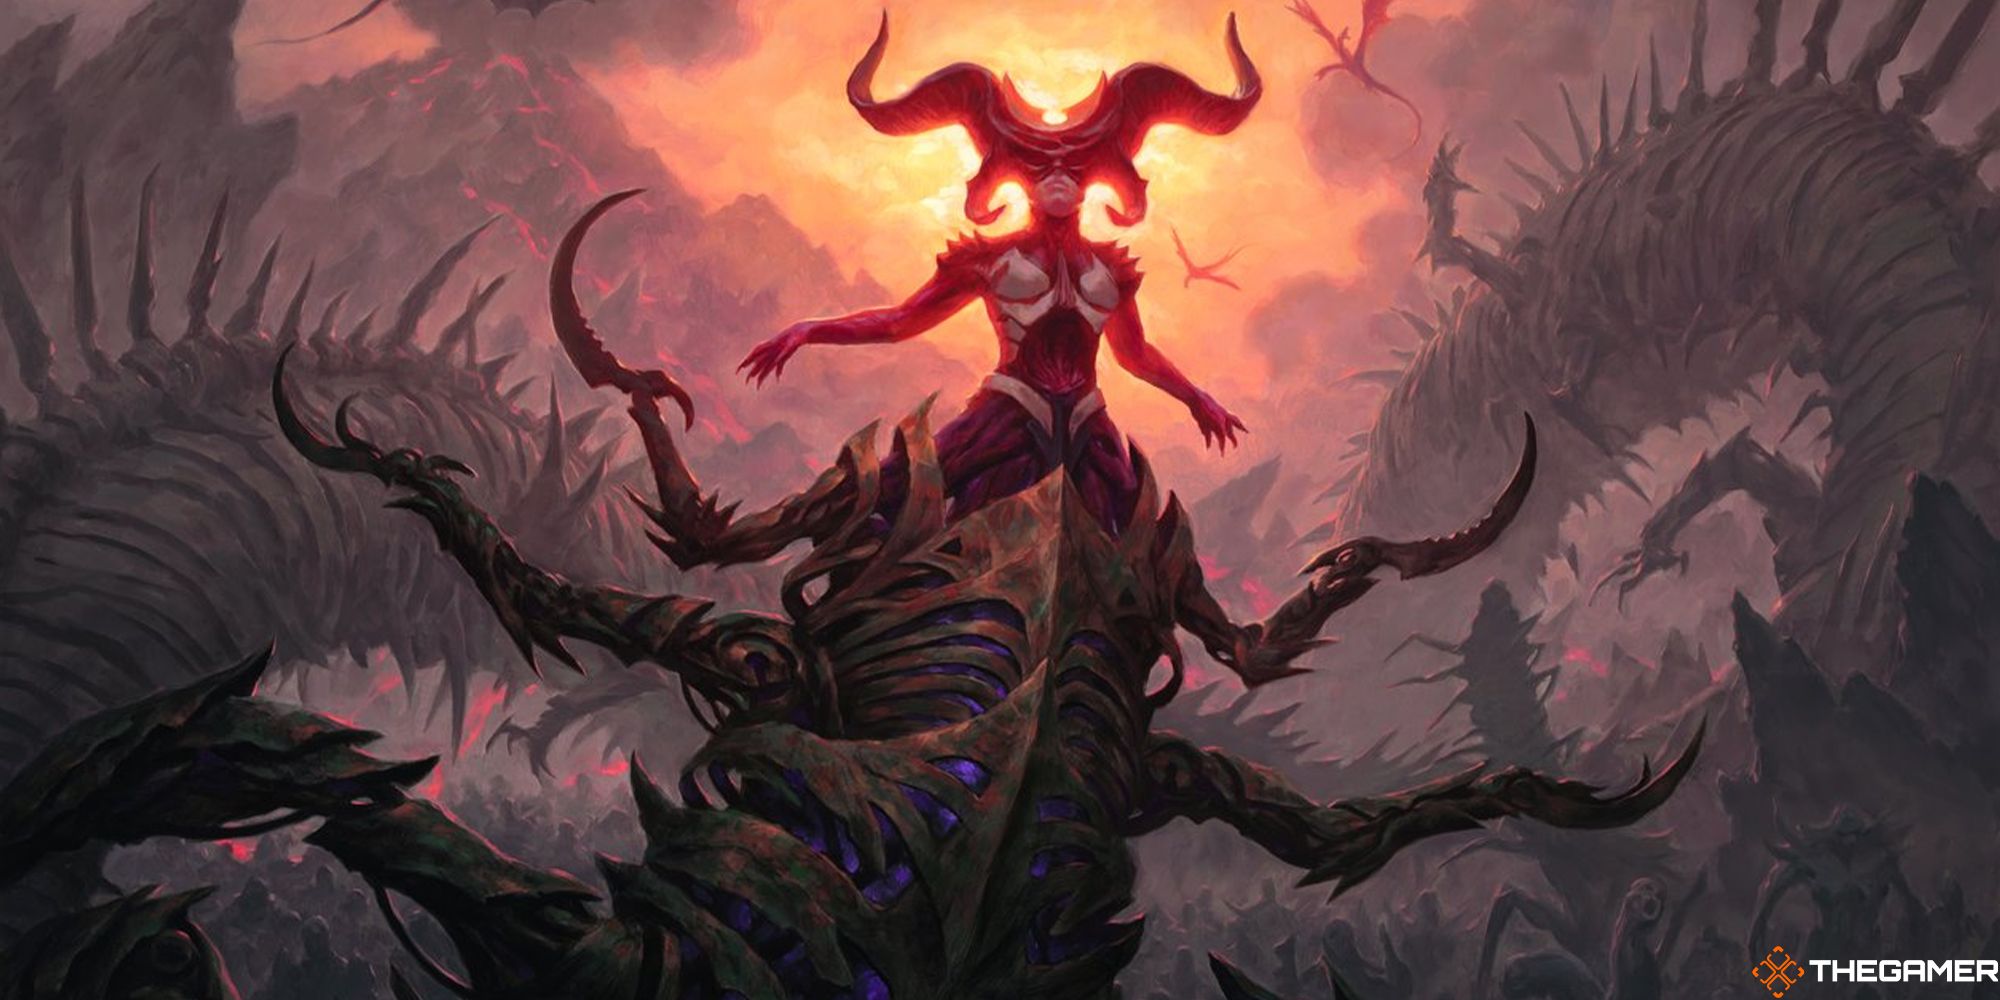 Magic: The Gathering Skips Standard Rotation This Year, Increases Format To Three Years